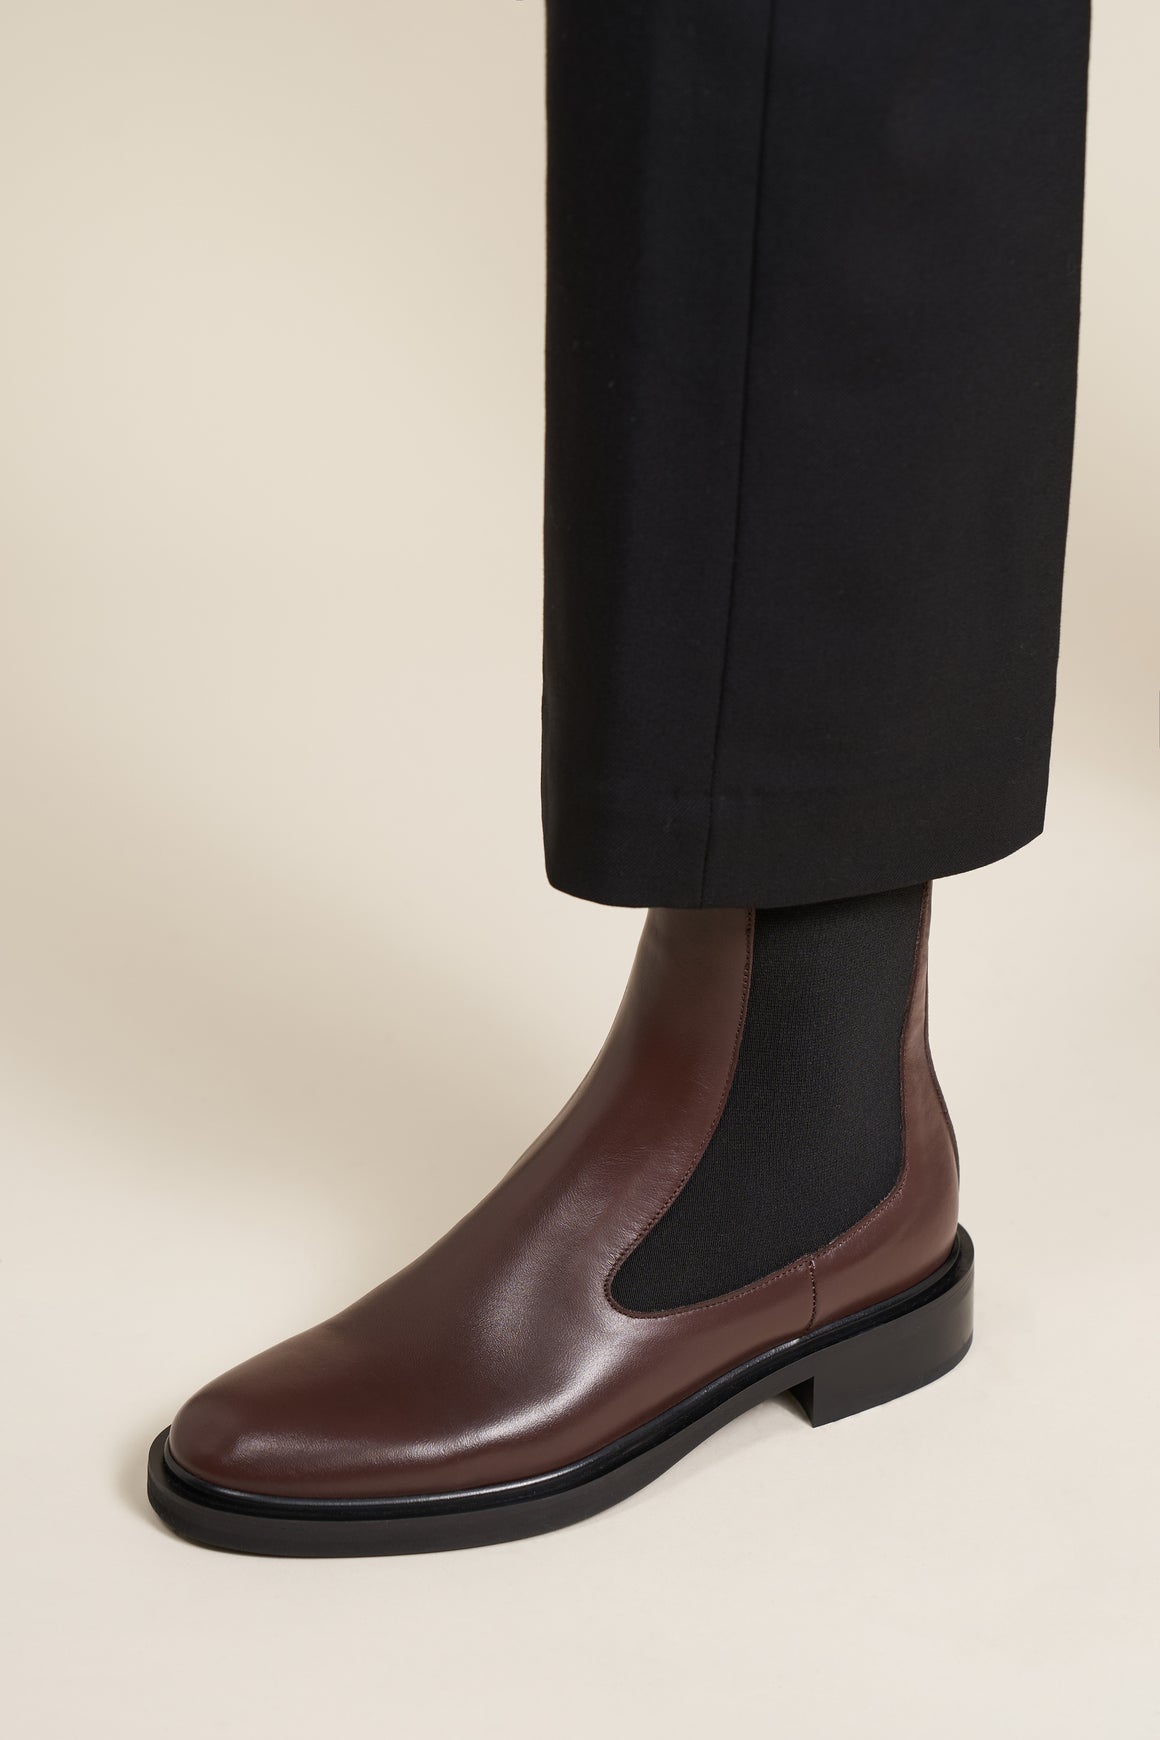 The Grace Boot